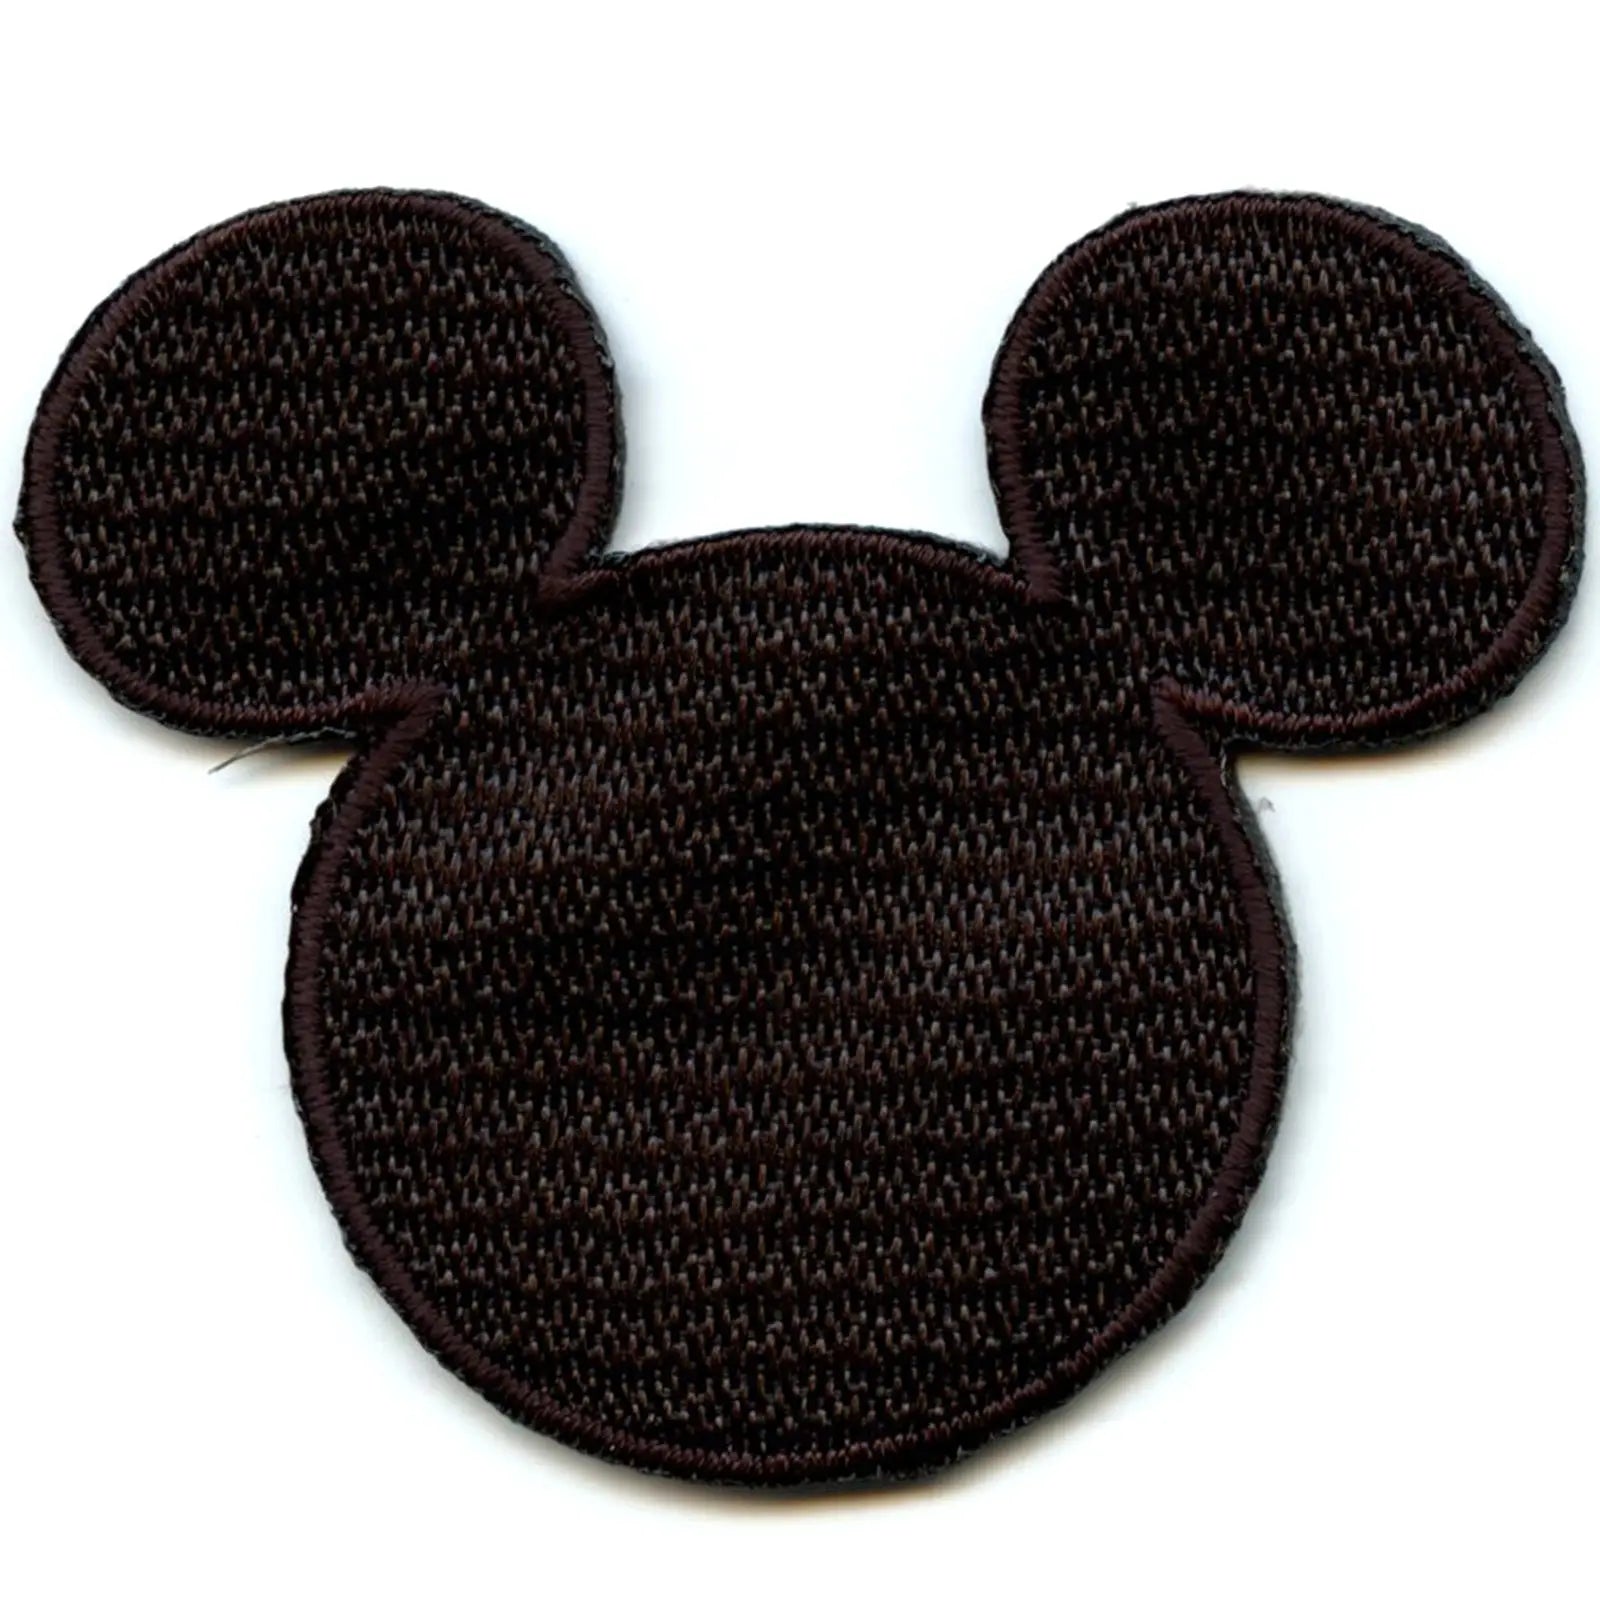 Disney Mickey Mouse Head Silhouette Iron on Embroidered Patch 